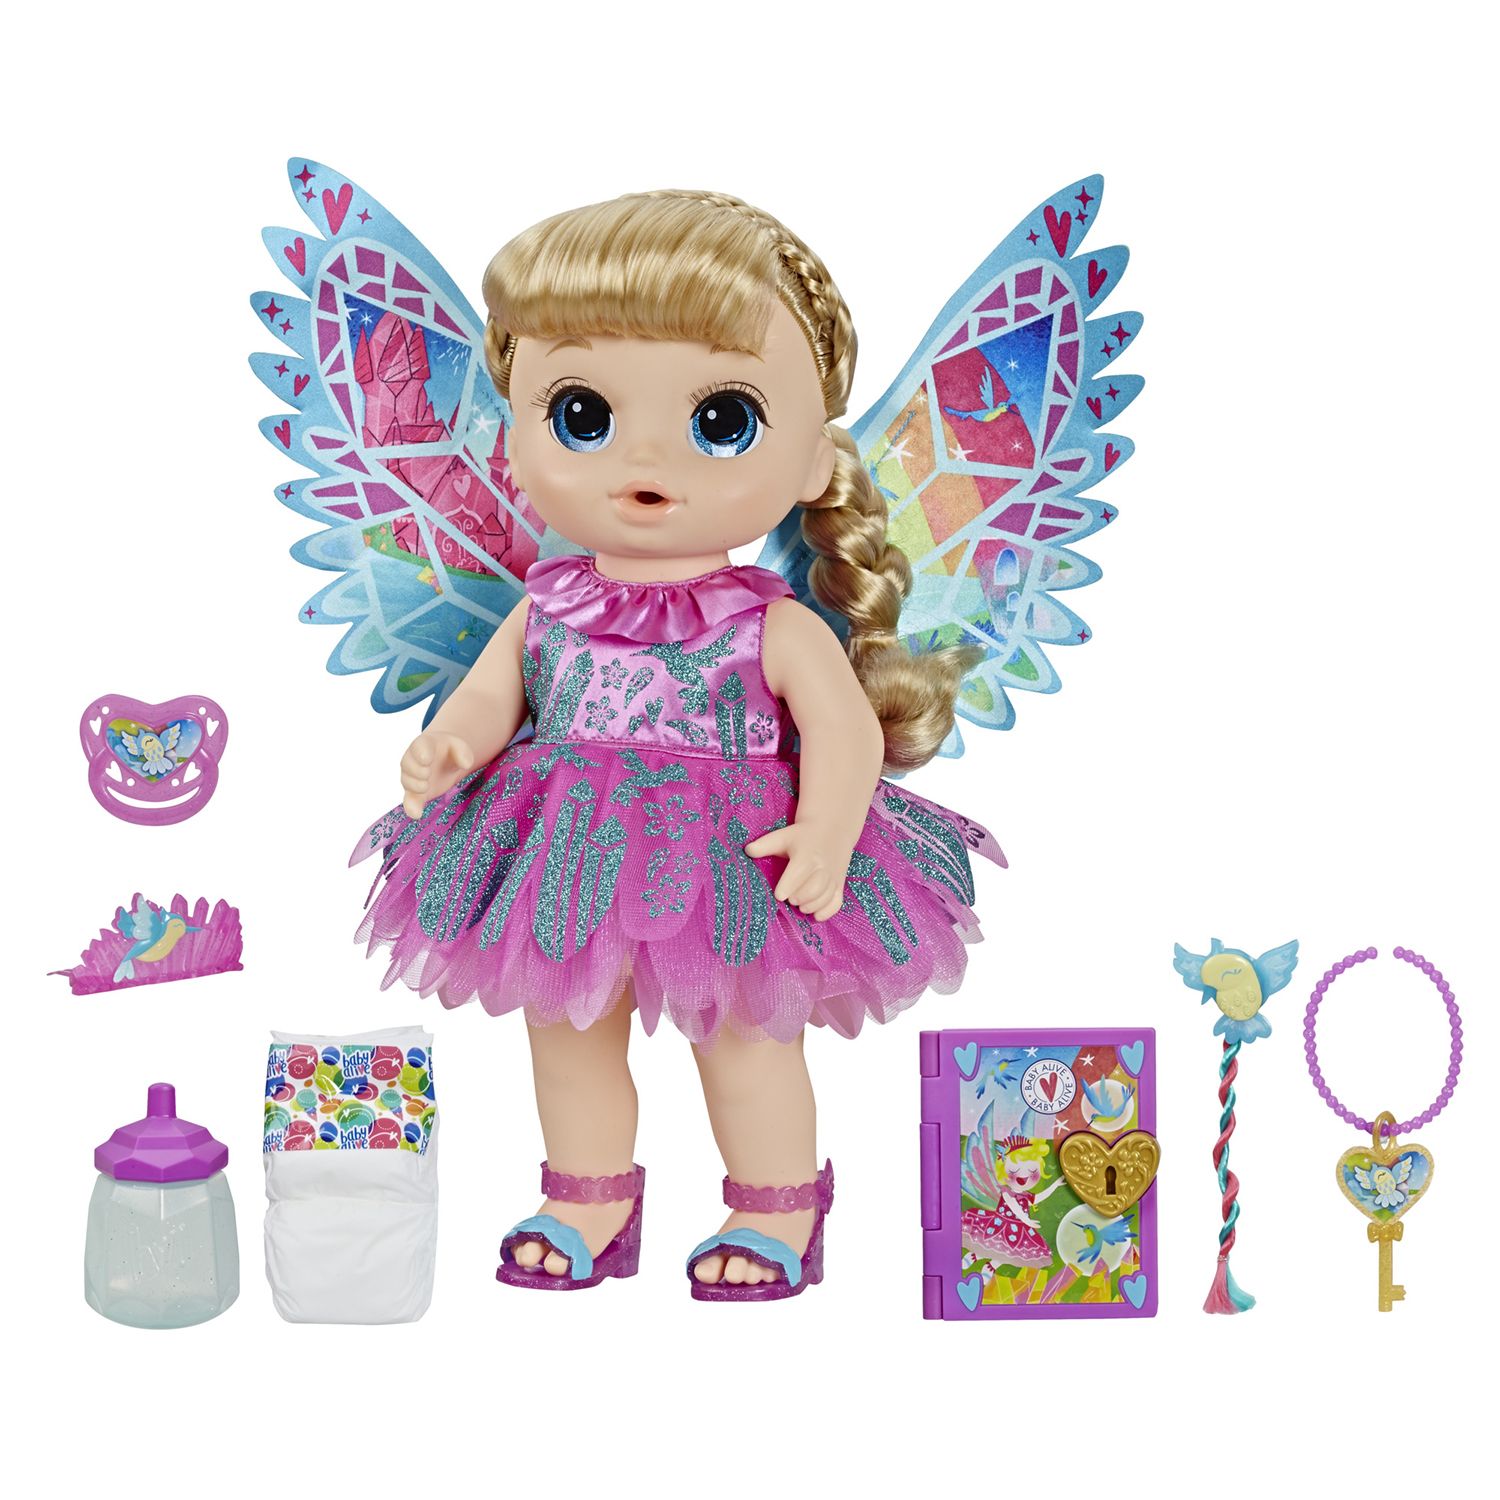 baby alive fairy doll